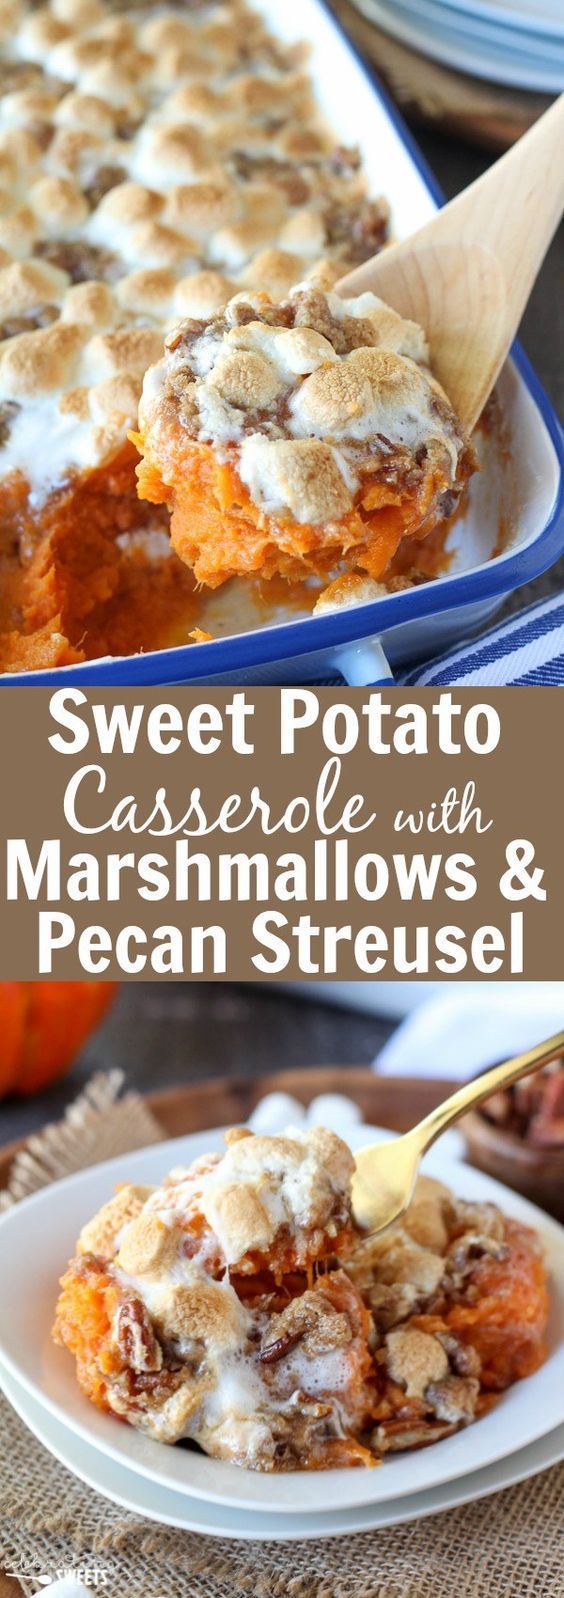 Sweet Potato Casserole with Marshmallows and Streusel - Mashed sweet potato casserole topped with toasted marshmallows and a brown sugar cinnamon pecan streusel. The perfect side dish for Thanksgiving or any other holiday celebration. -   20 thanksgiving recipes mashed
 ideas